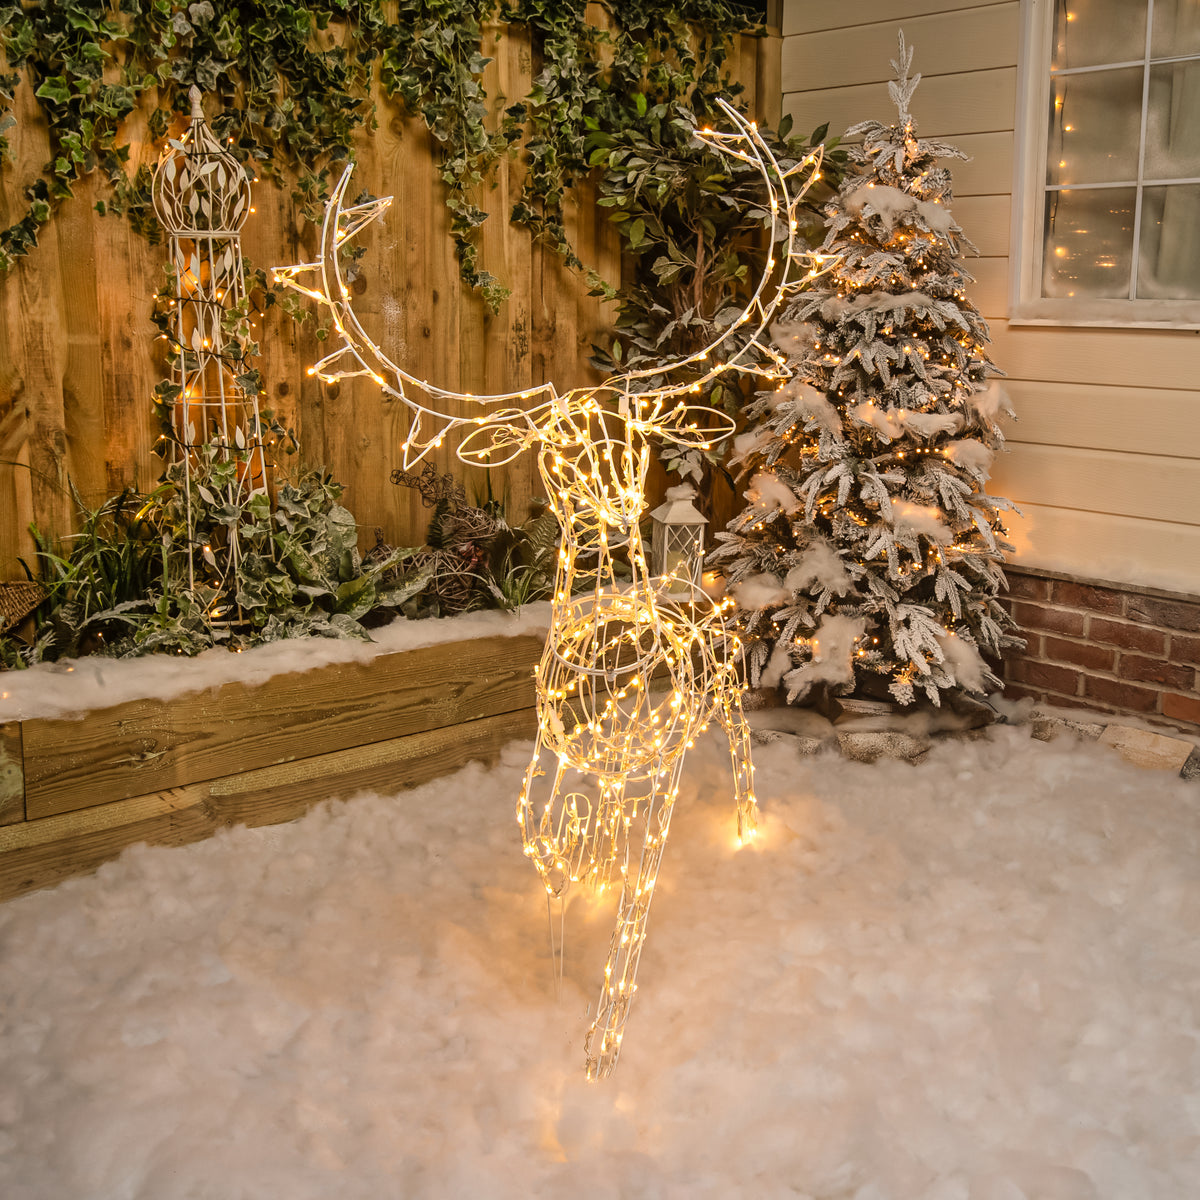 Christmas Reindeer Light - 1.4M White Wire Light Up Walking Stag with 330 White LEDs